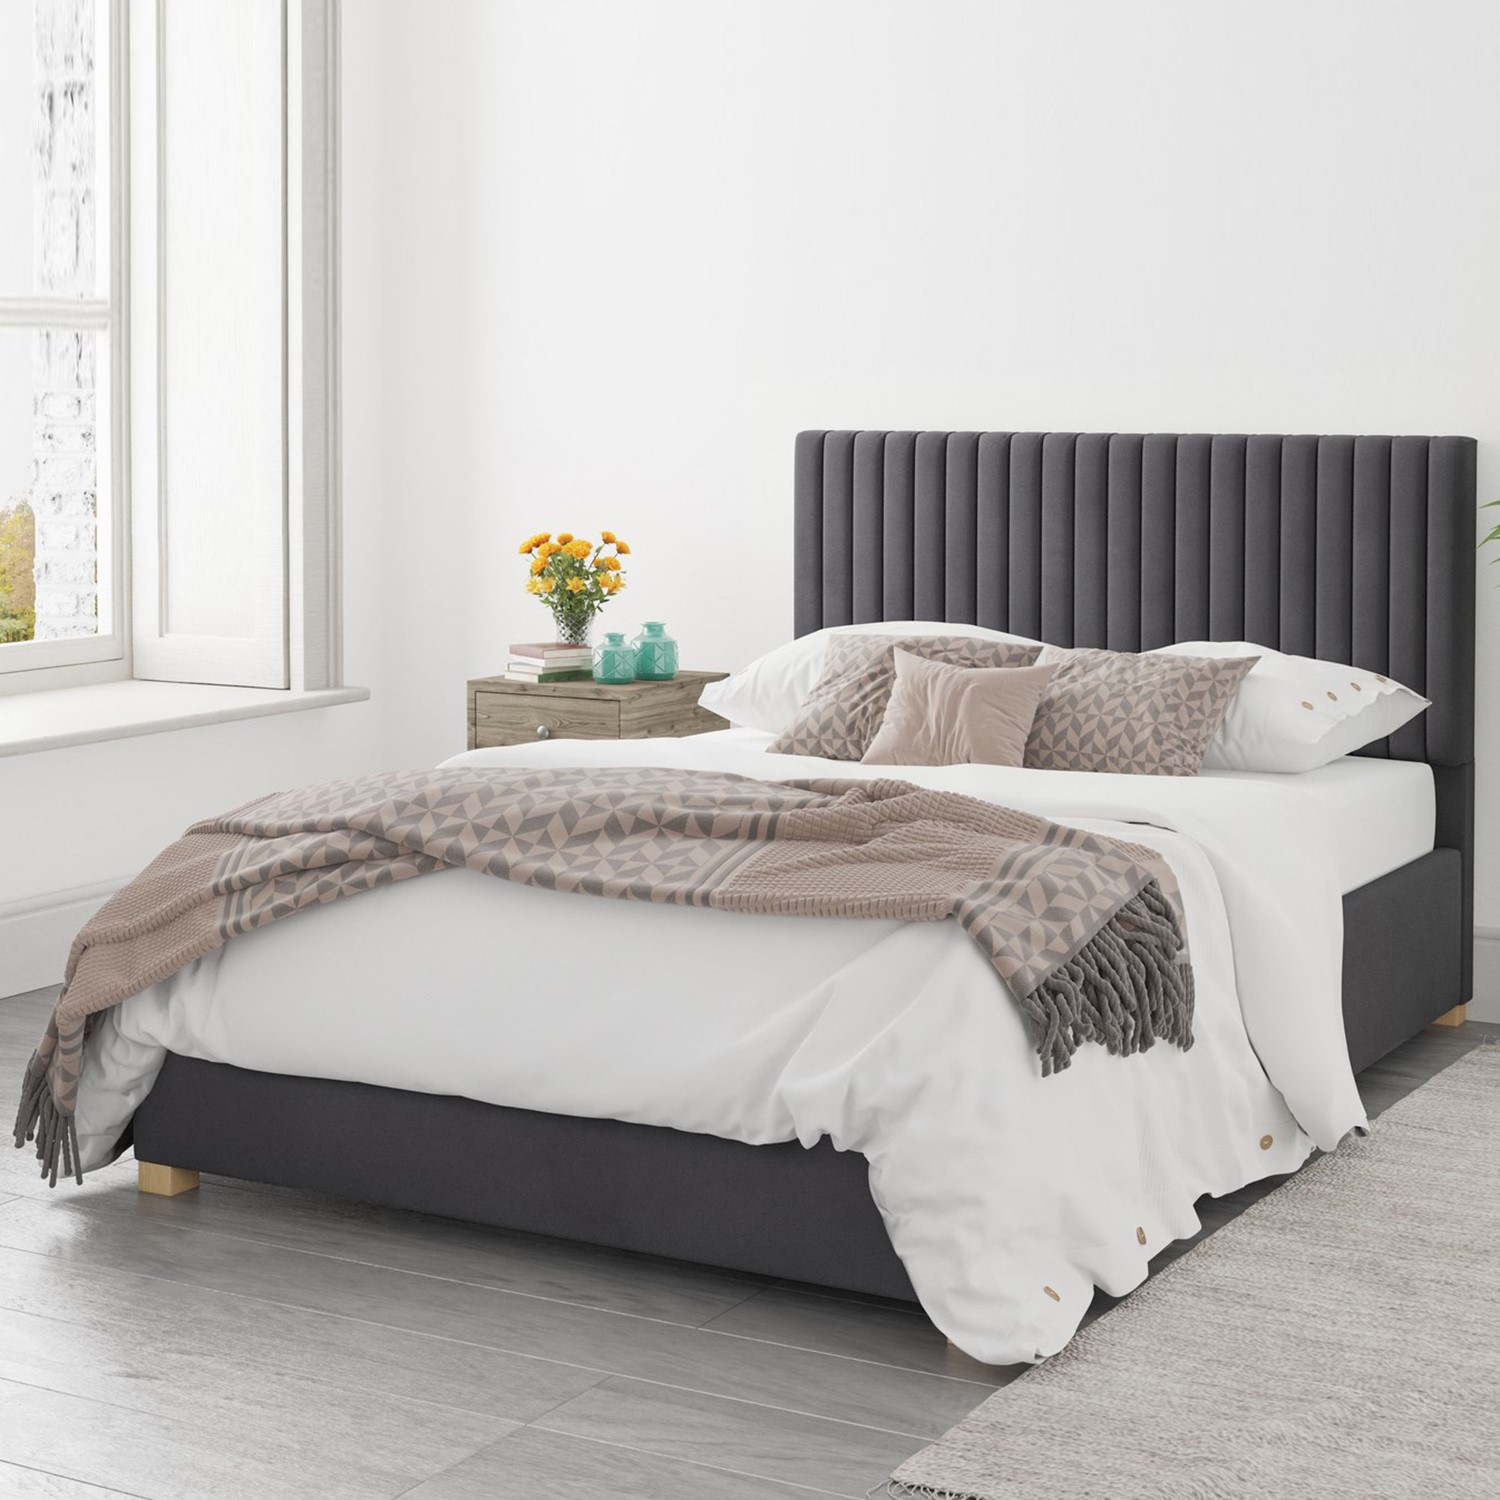 Read more about Grey velvet double ottoman bed piccadilly aspire